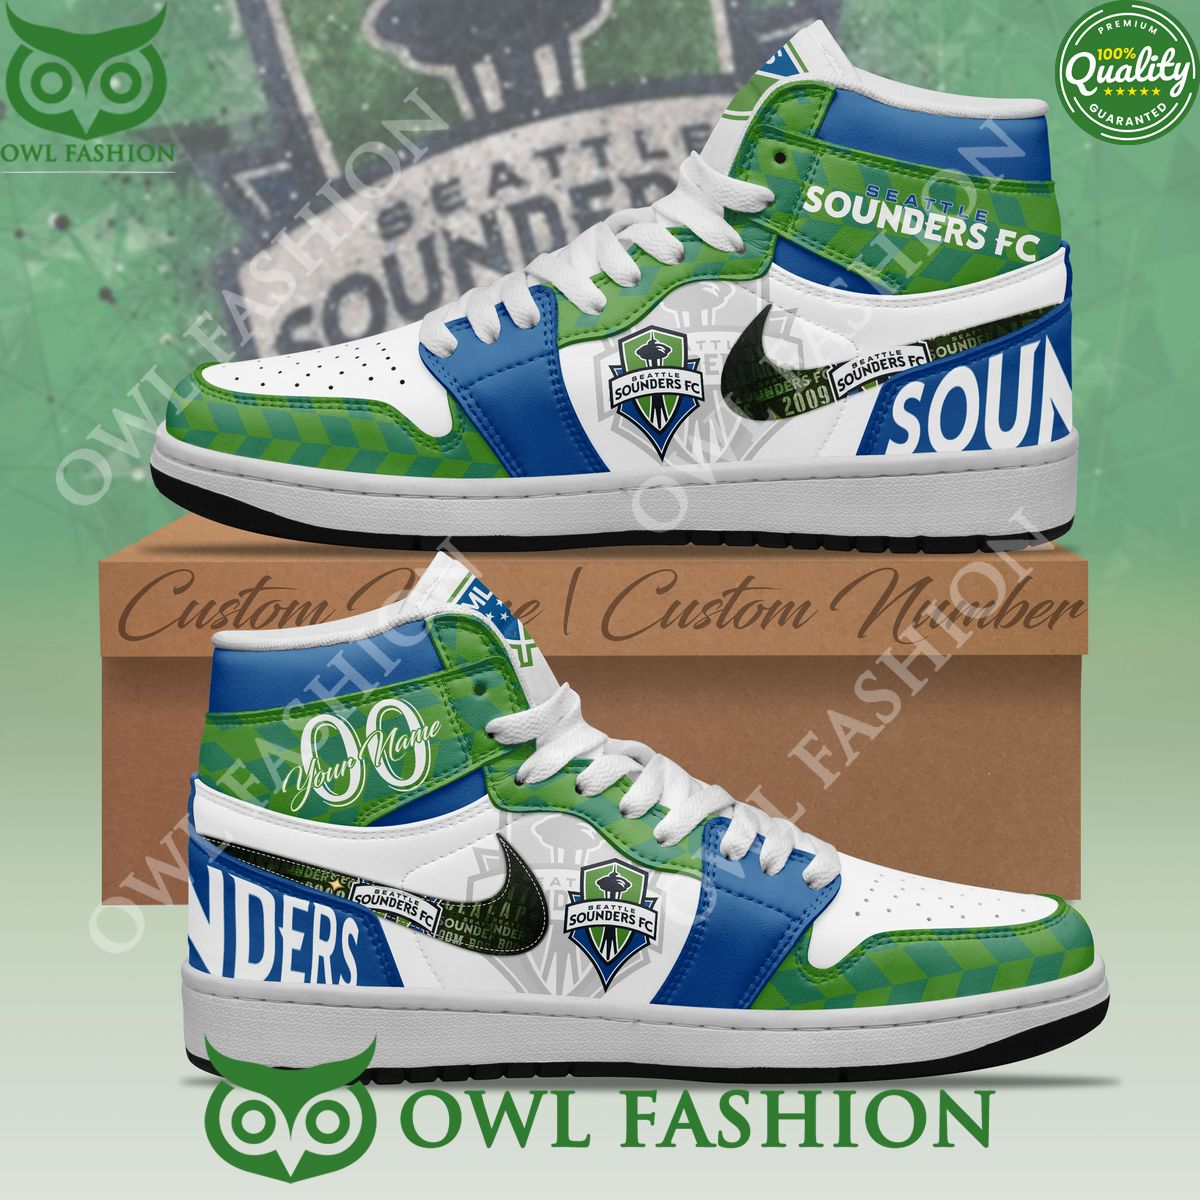 MLS Seattle Sounders FC Shoes Air Jordan 1 Customized Limited High Top